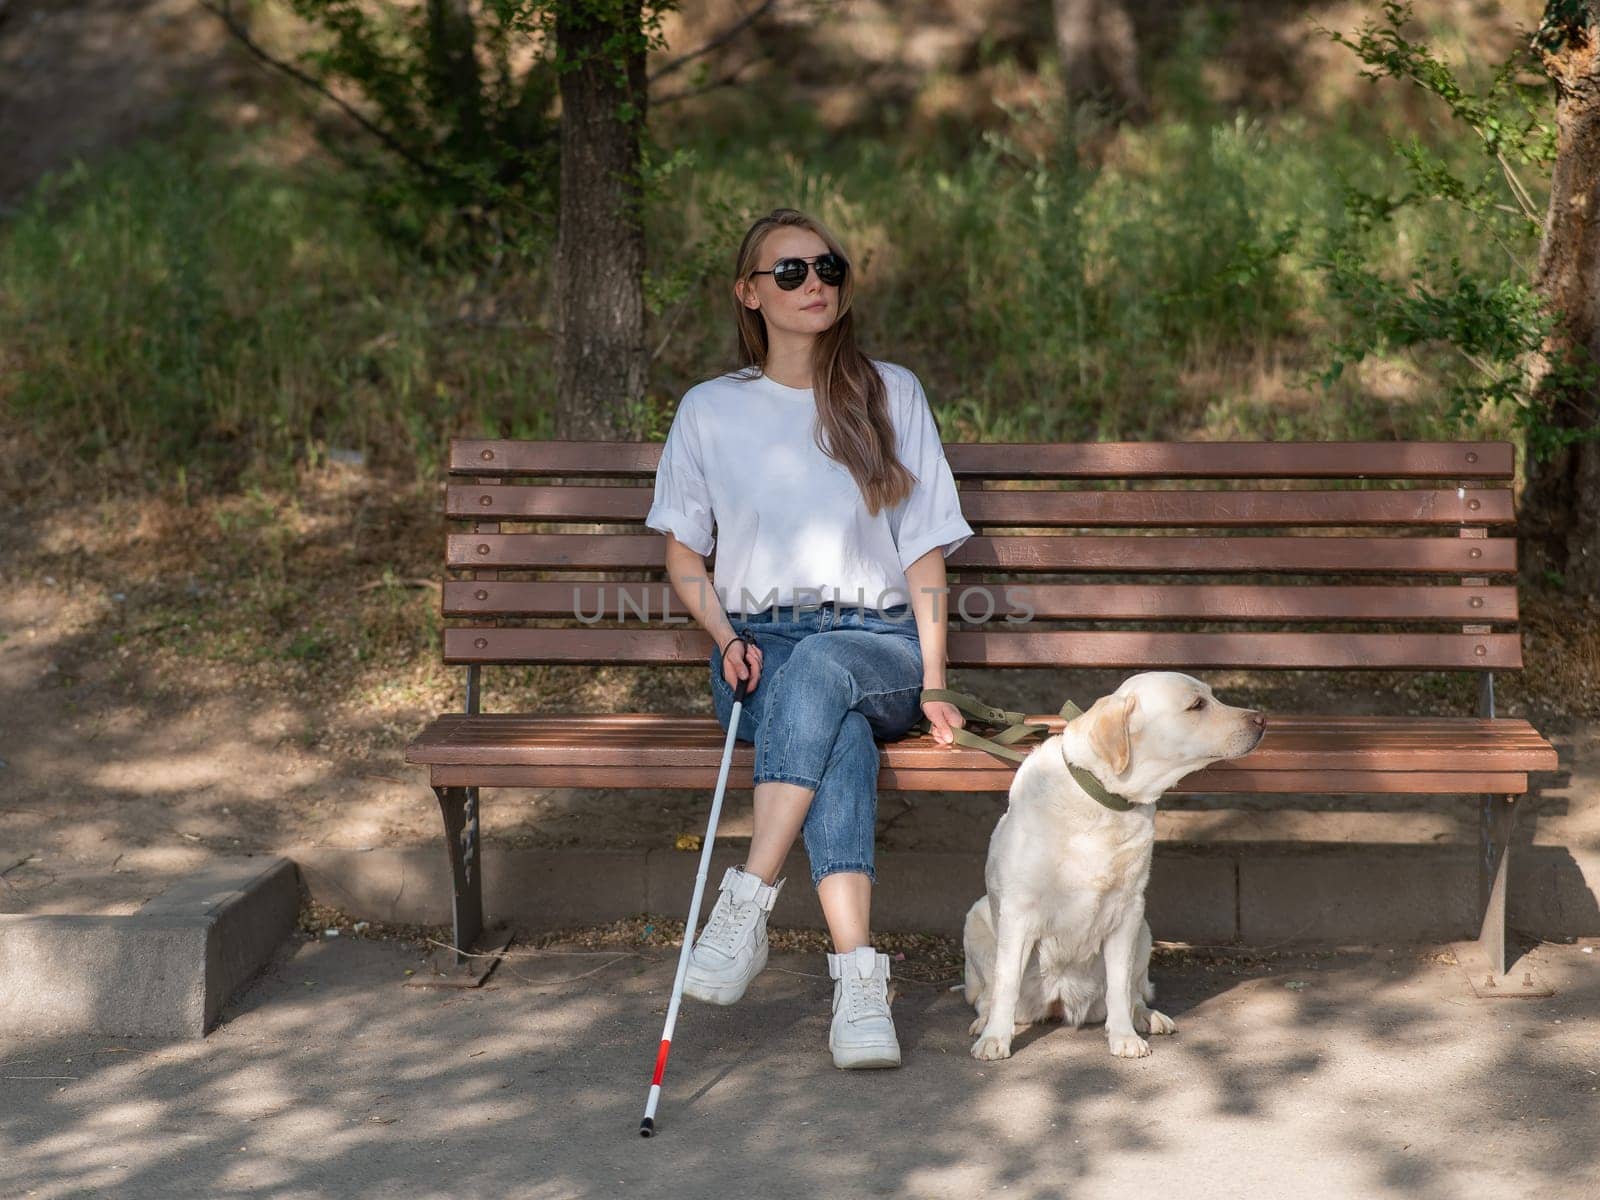 Blind caucasian woman sitting on bench with guide dog. by mrwed54